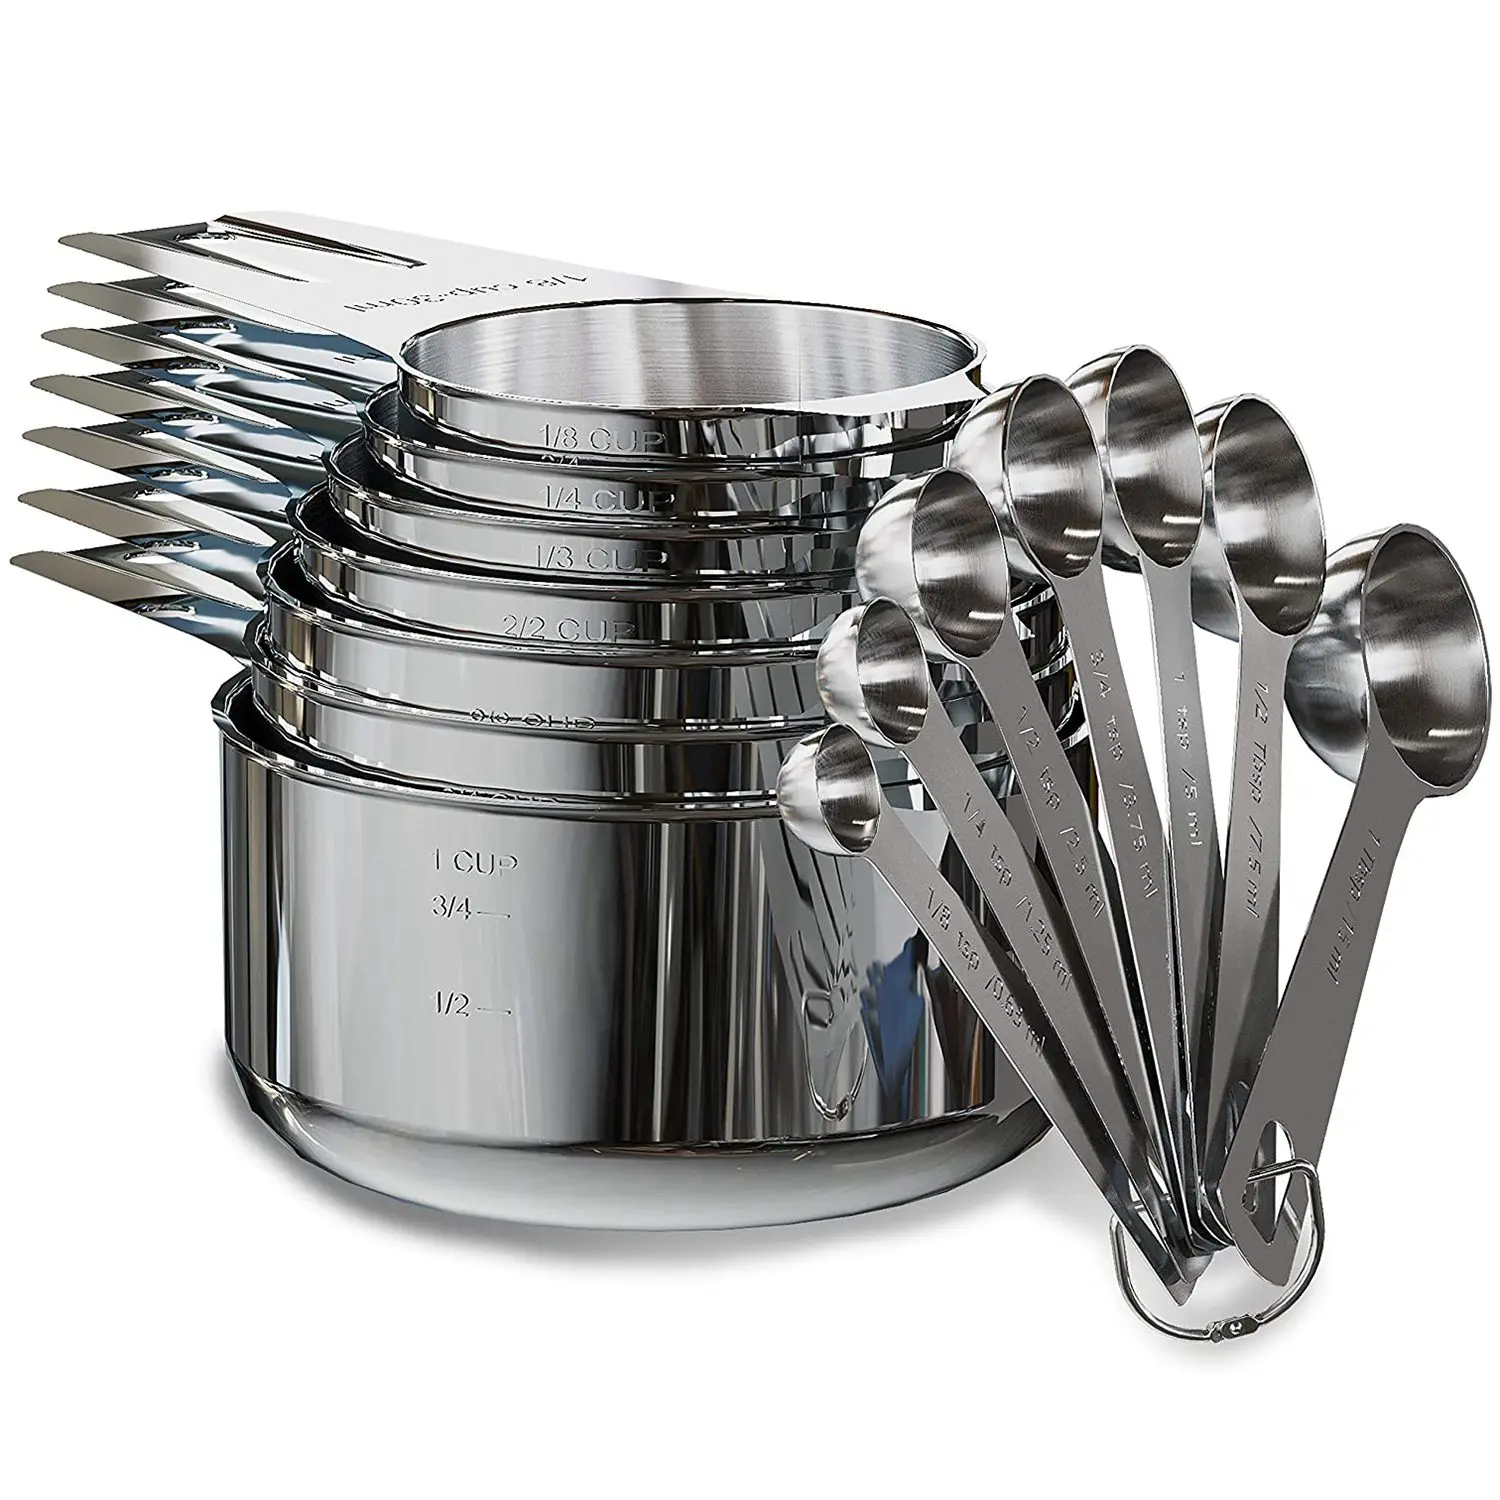 

Stainless Steel Measuring Cups and Spoons Set of 14 Pieces,7 Nesting Cups and 7 Stackable Spoons Professional Portable